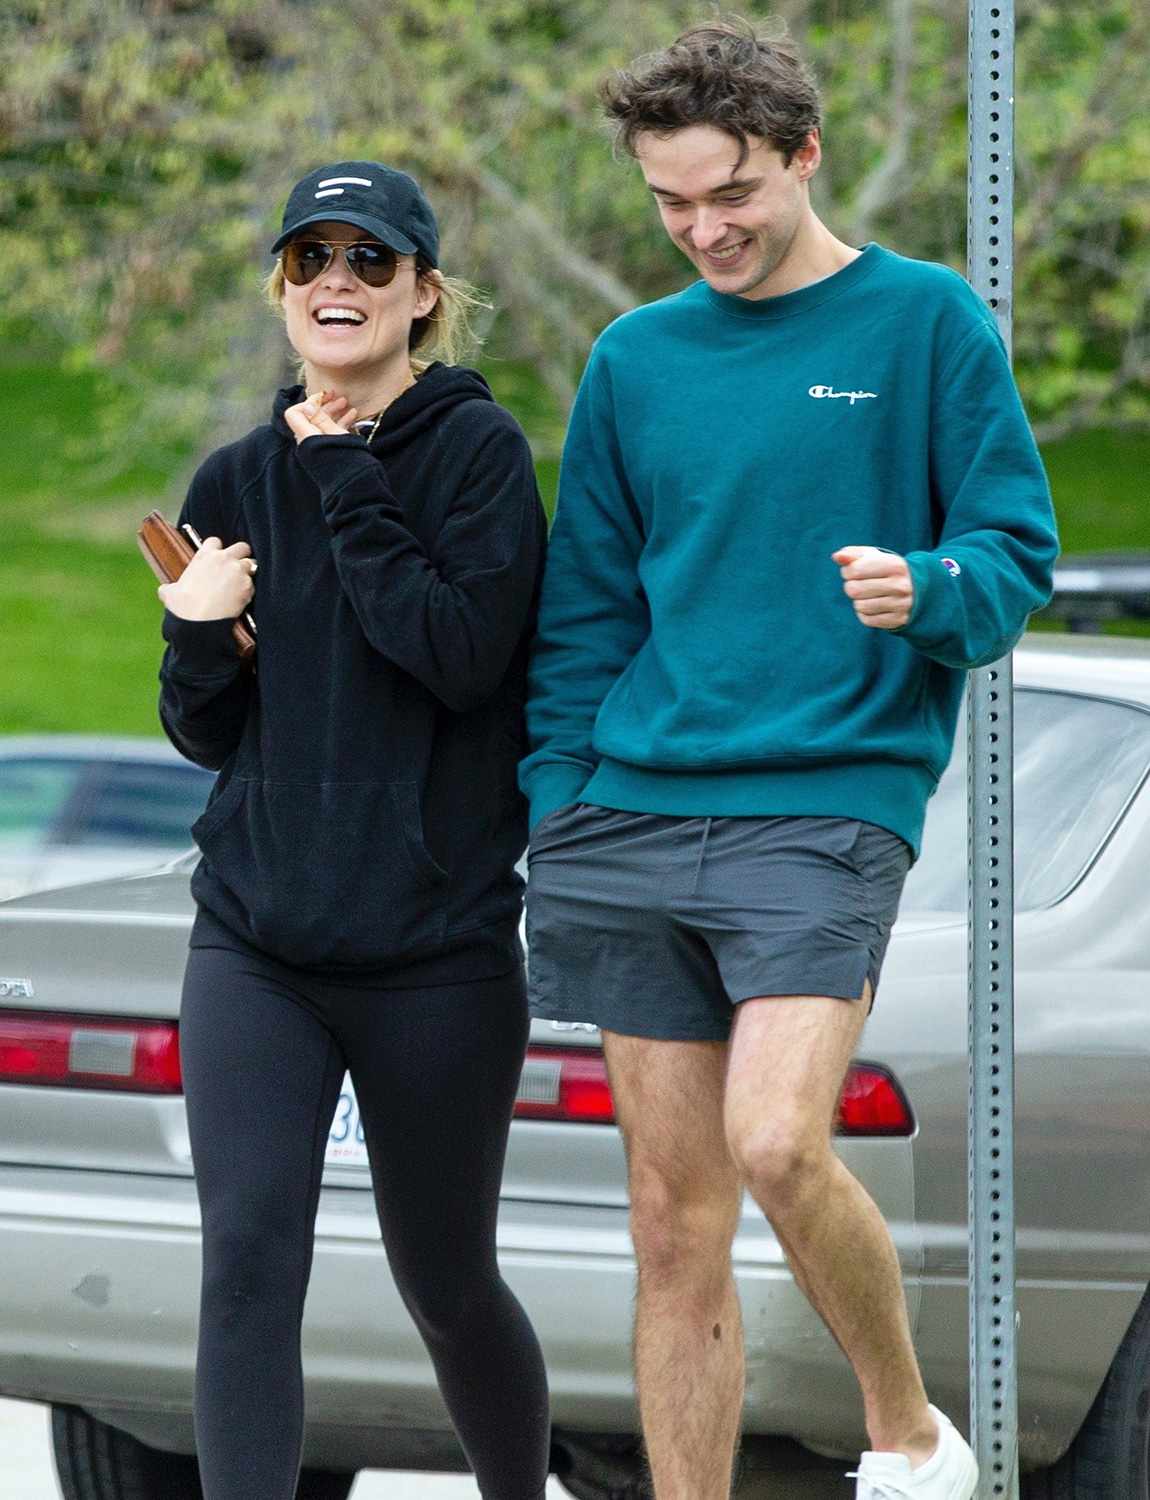 Olivia Wilde takes a stroll with her little bro Charlie Cockburn